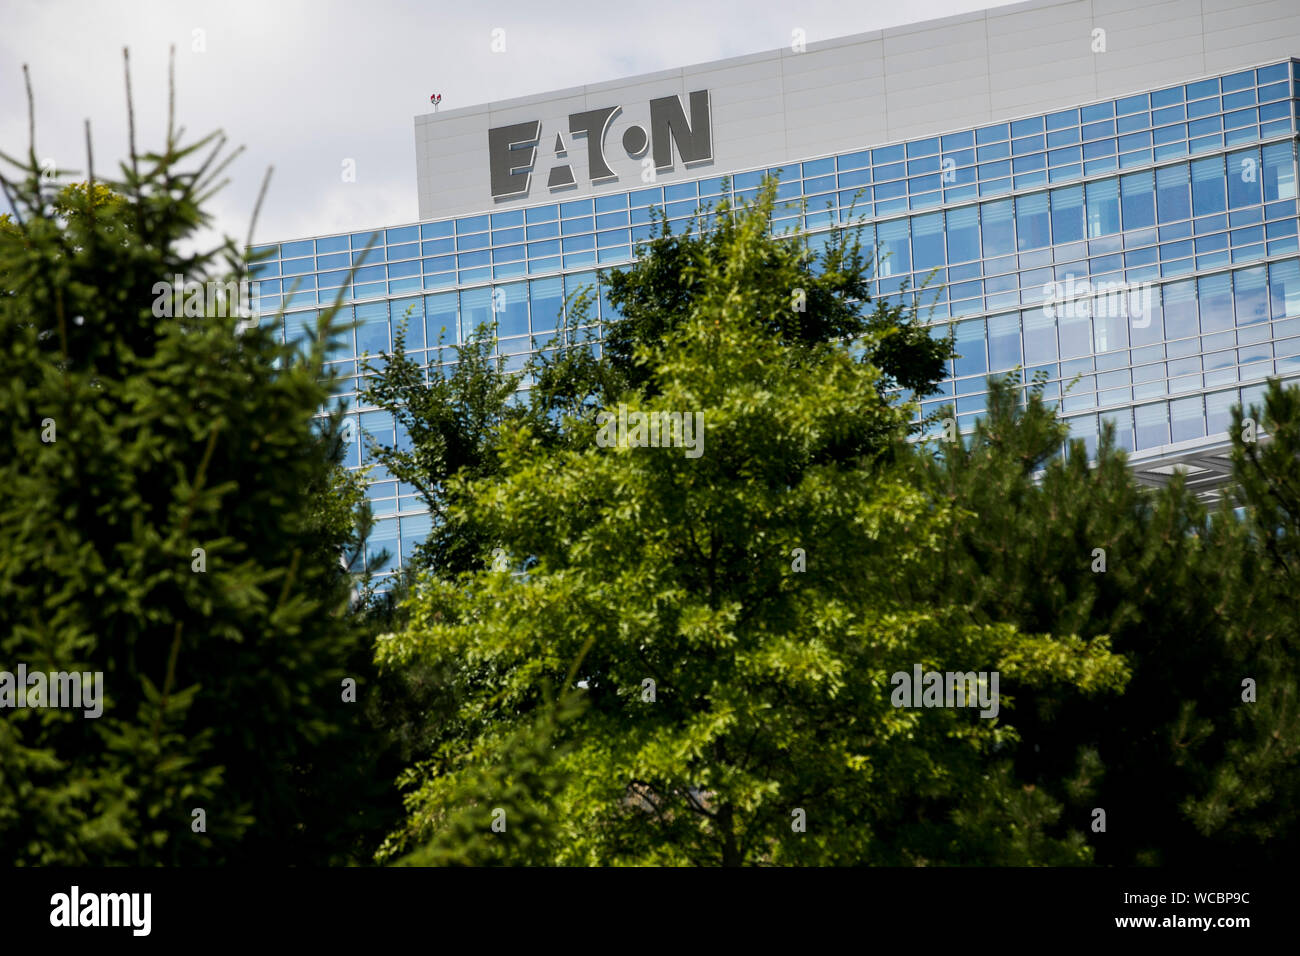 A logo sign outside of the operational headquarters of the Eaton Corporation in Beachwood, Ohio on August 11, 2019. Stock Photo